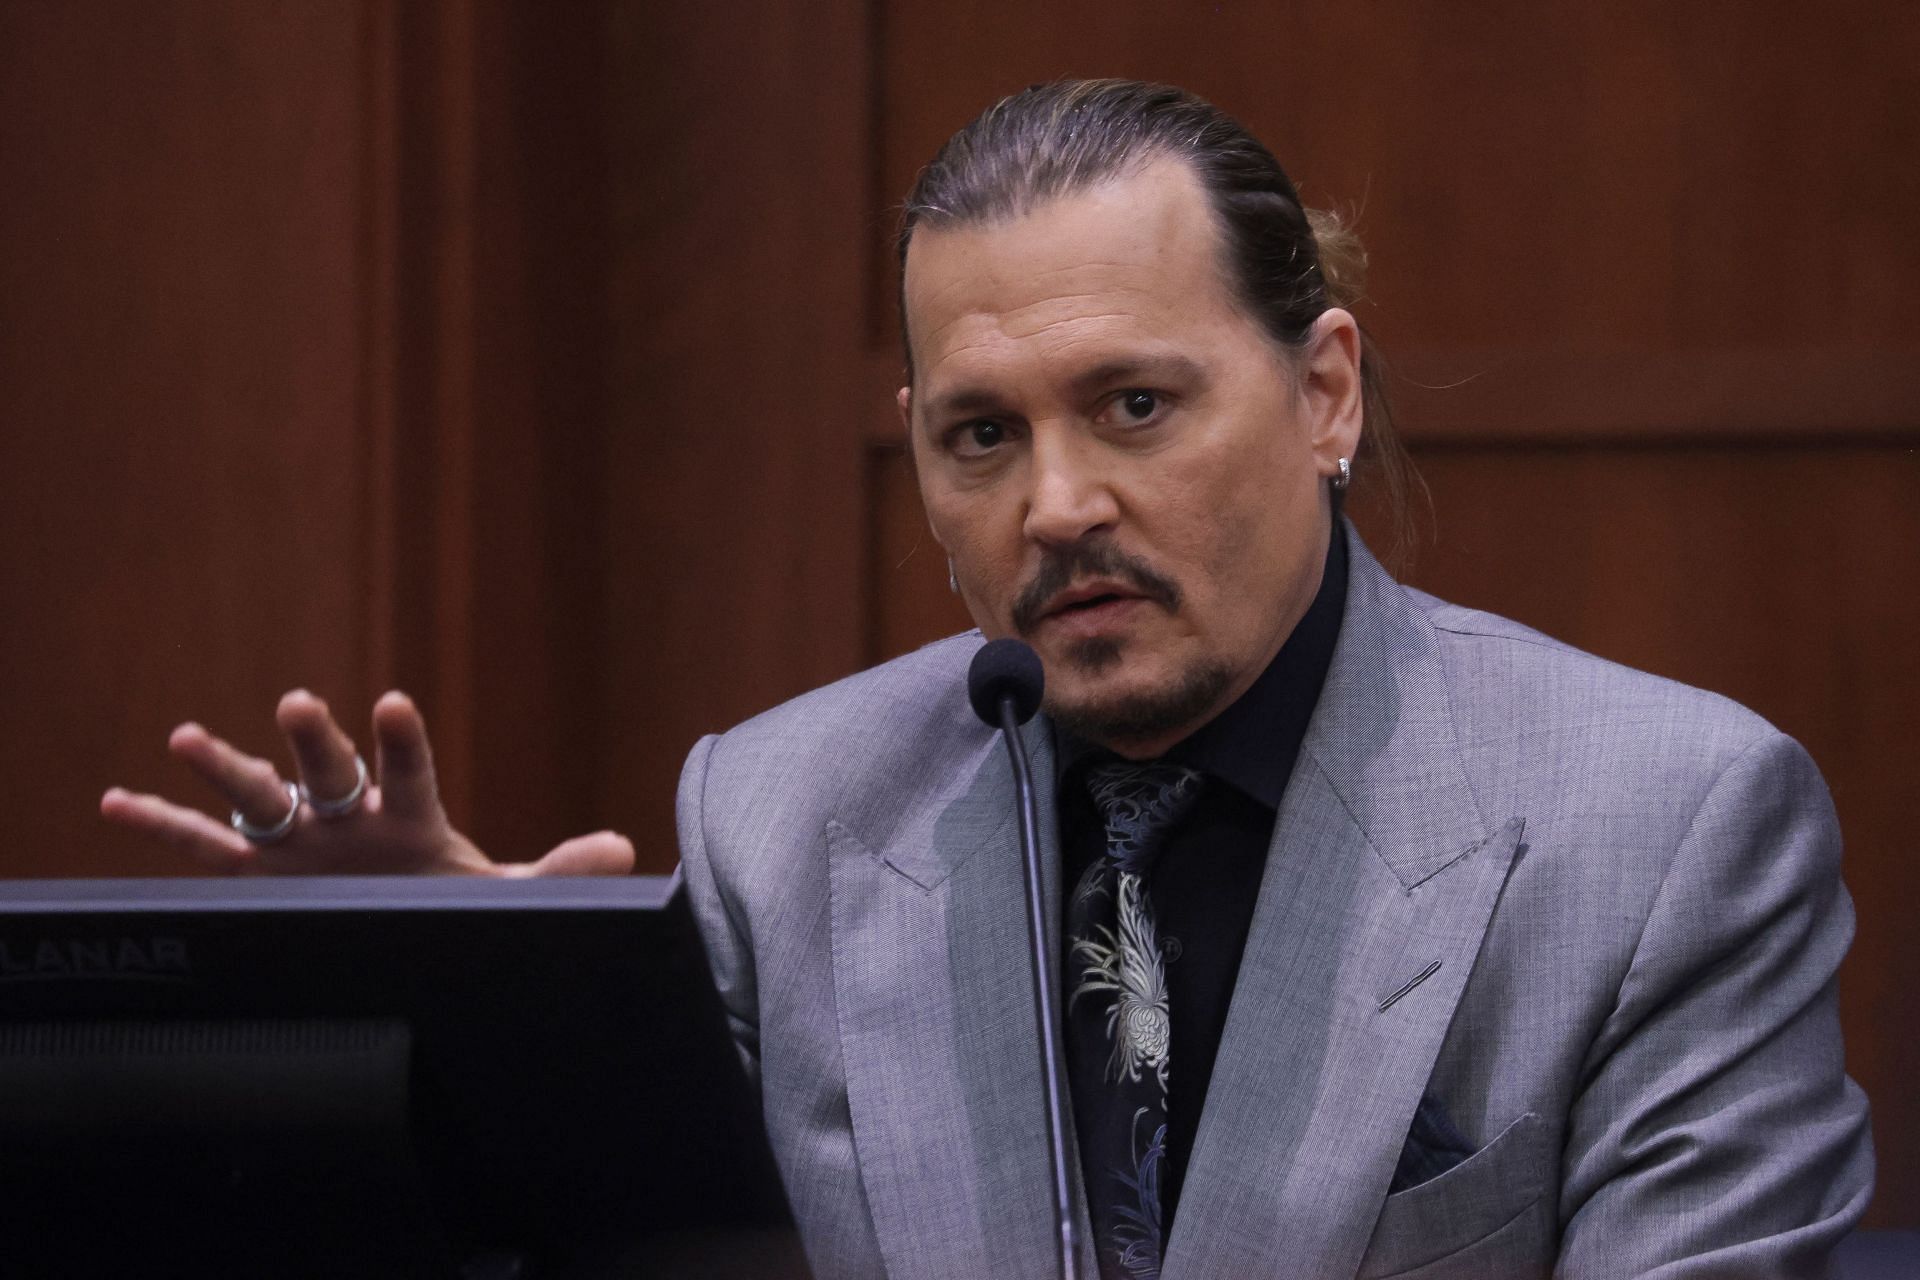 Johnny Depp in court (Image via Evelyn Hocksteinp/Pool/AFP/Getty Images)